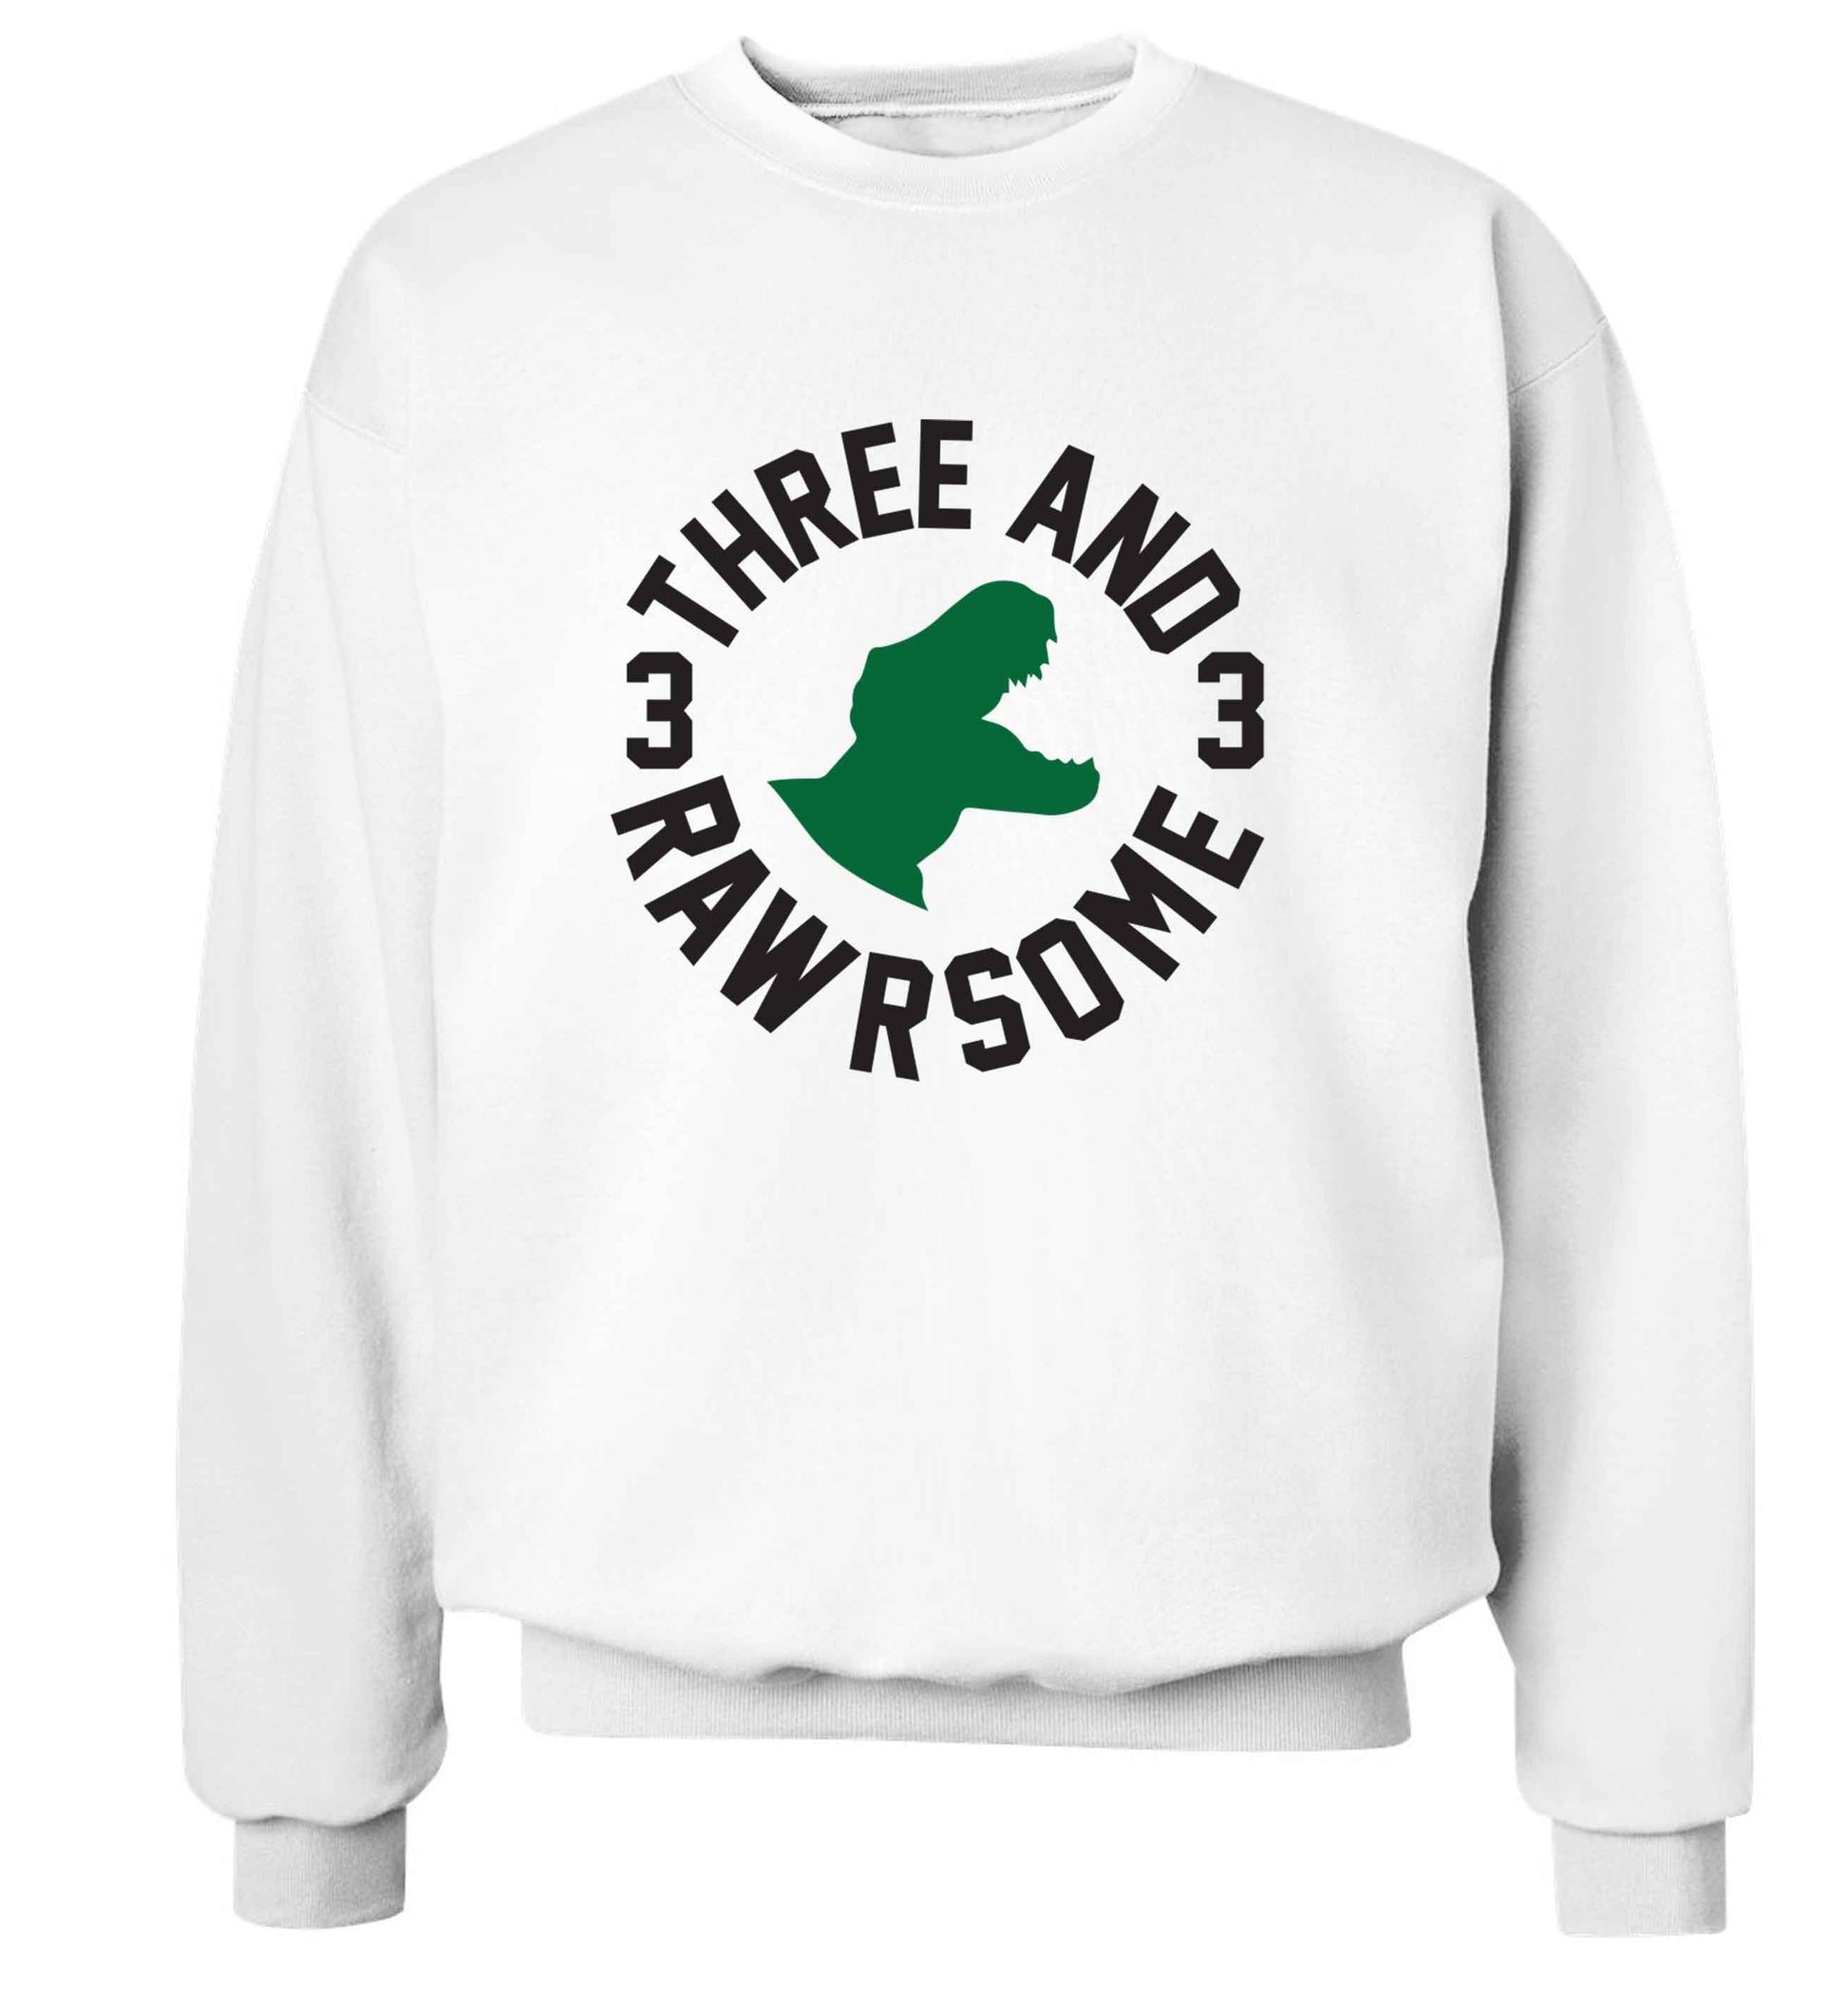 Three and rawrsome adult's unisex white sweater 2XL